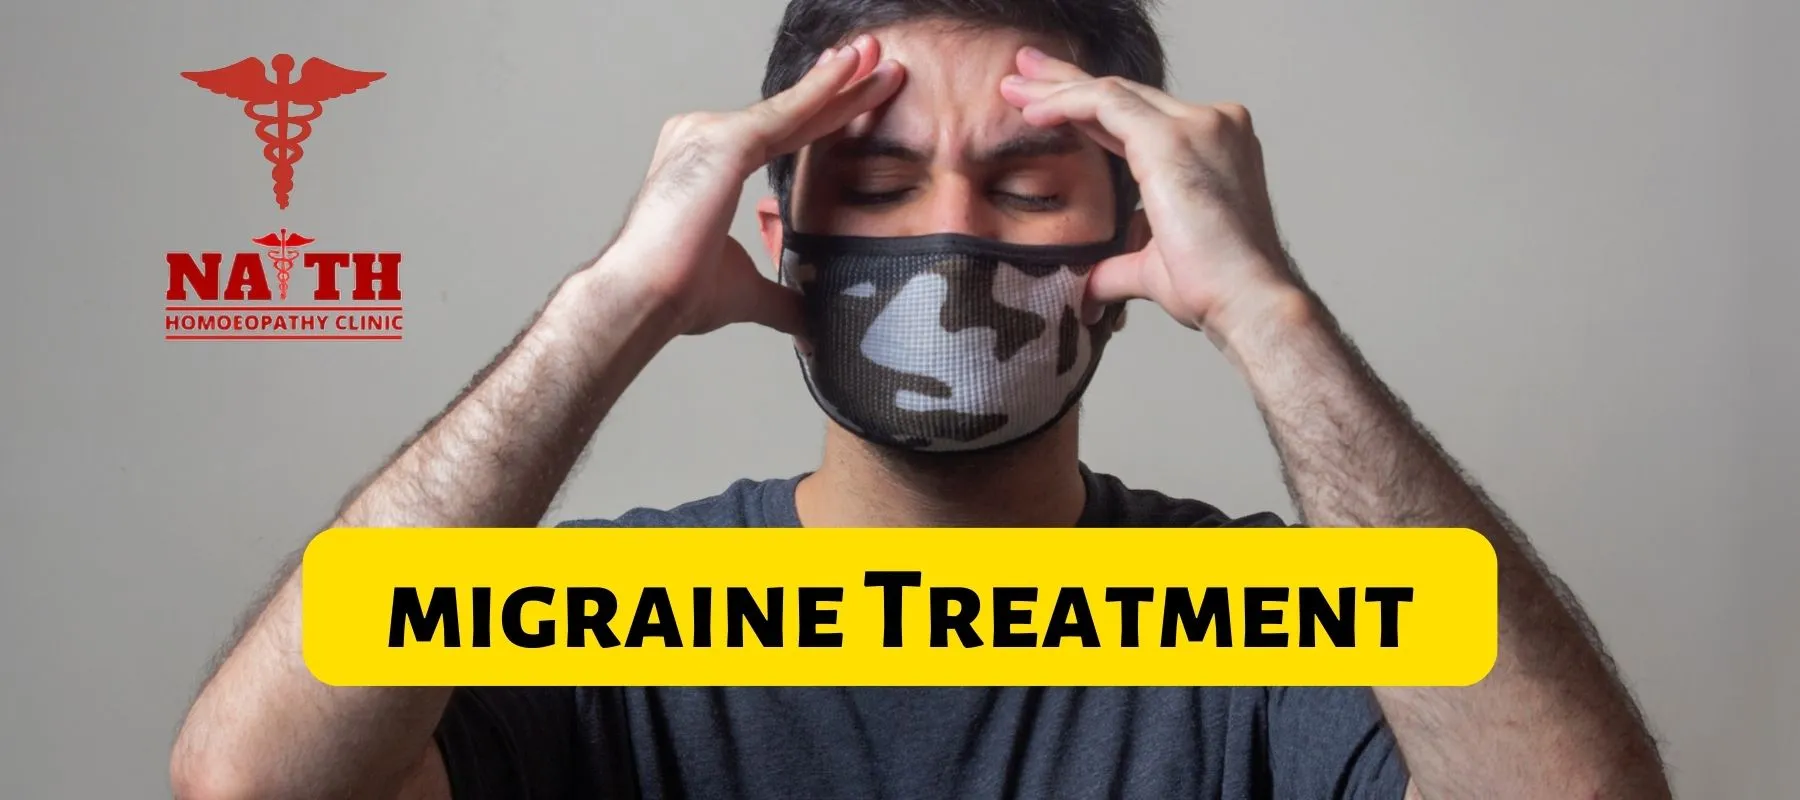 Migraine or Headaches Treatment in Homeopathy